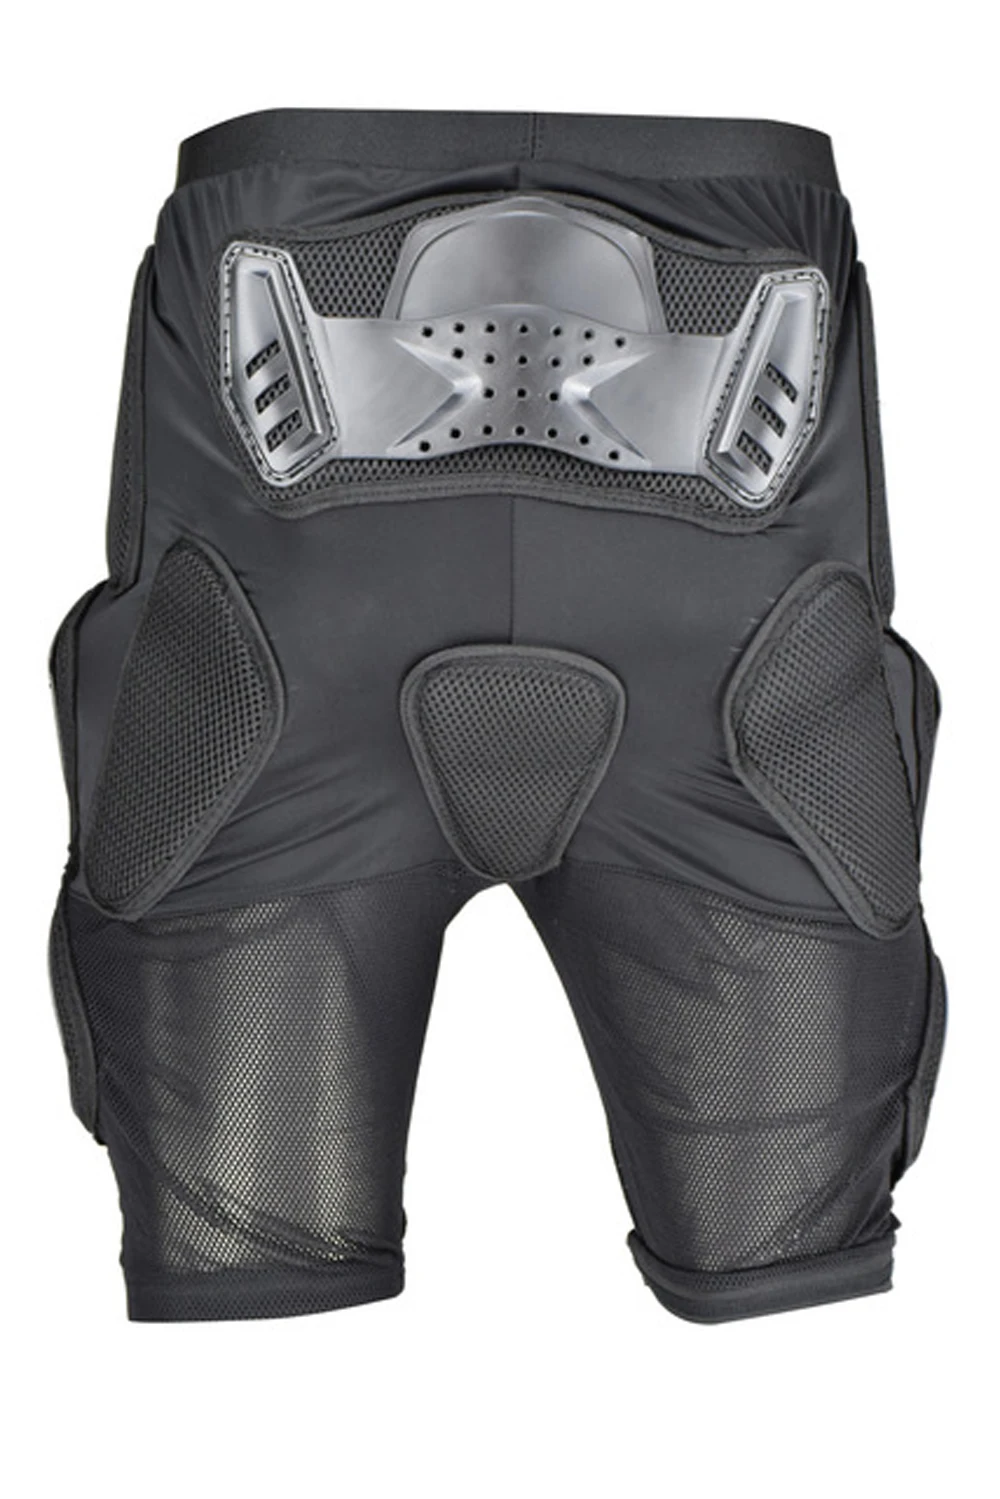 GHOST RACING Motocross Short Protector Motorcycle Shorts Moto Protective Gear Ar - £340.64 GBP